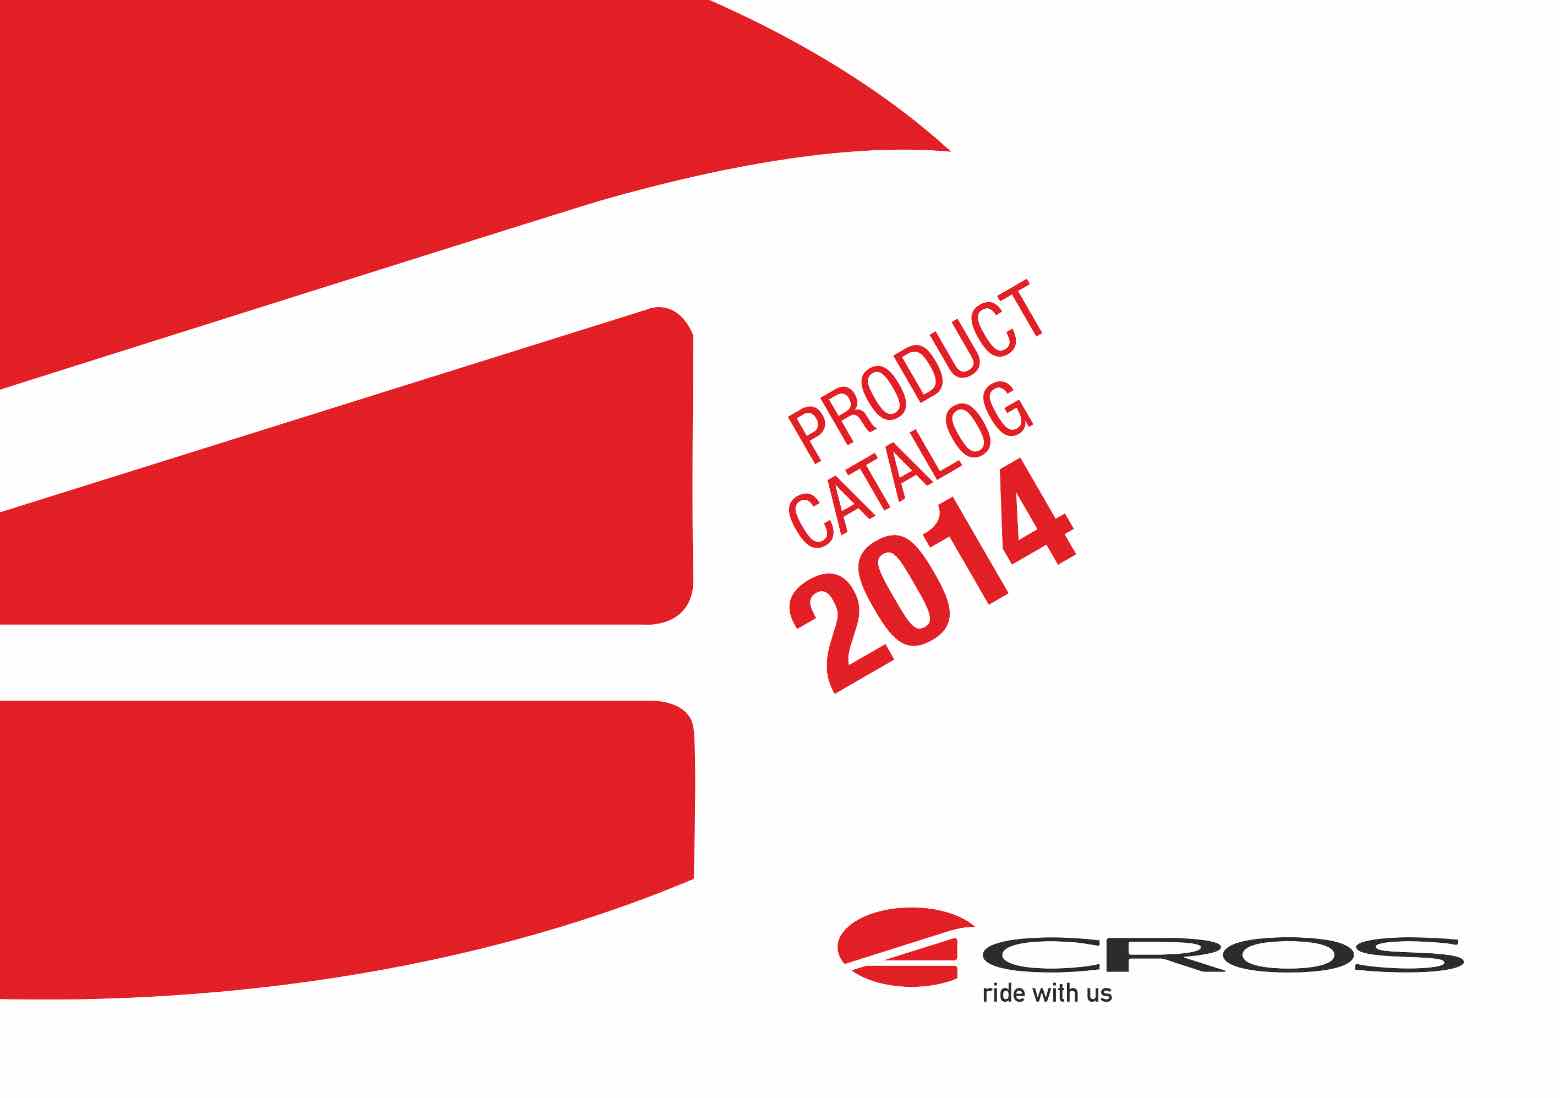 Acros - Product Catalog 2014 page 1 main image